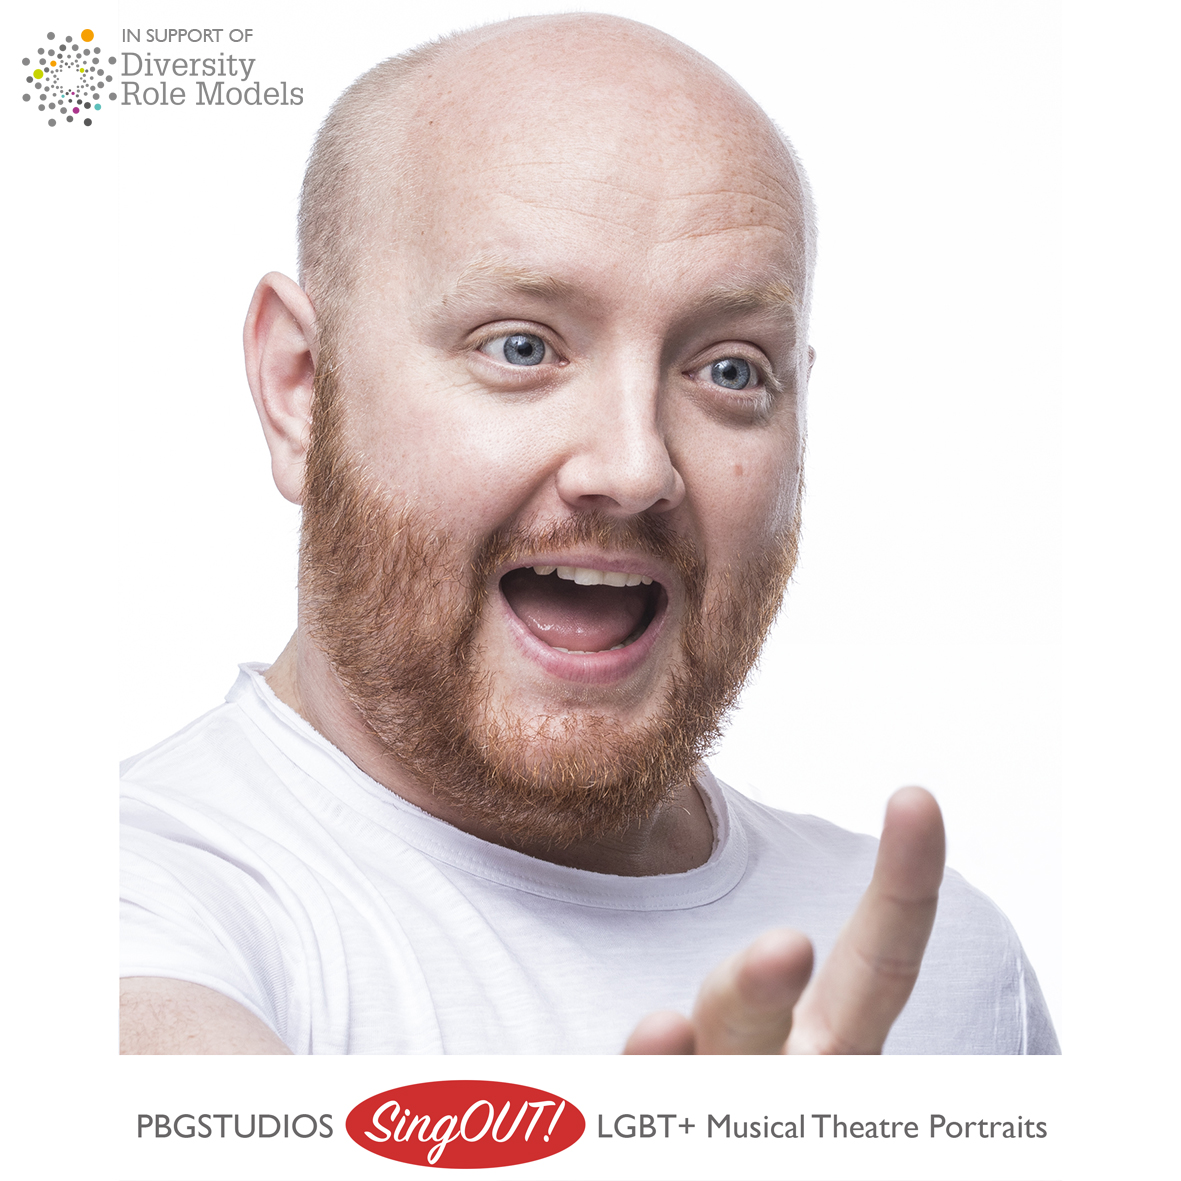 ANDREW BECKETT, actor/director Paul Taylor-Mills Repertory Seasons at the Theatre Royal Windsor. He is Associate director for Above The Stag Theatre where he has directed the last four pantomimes.